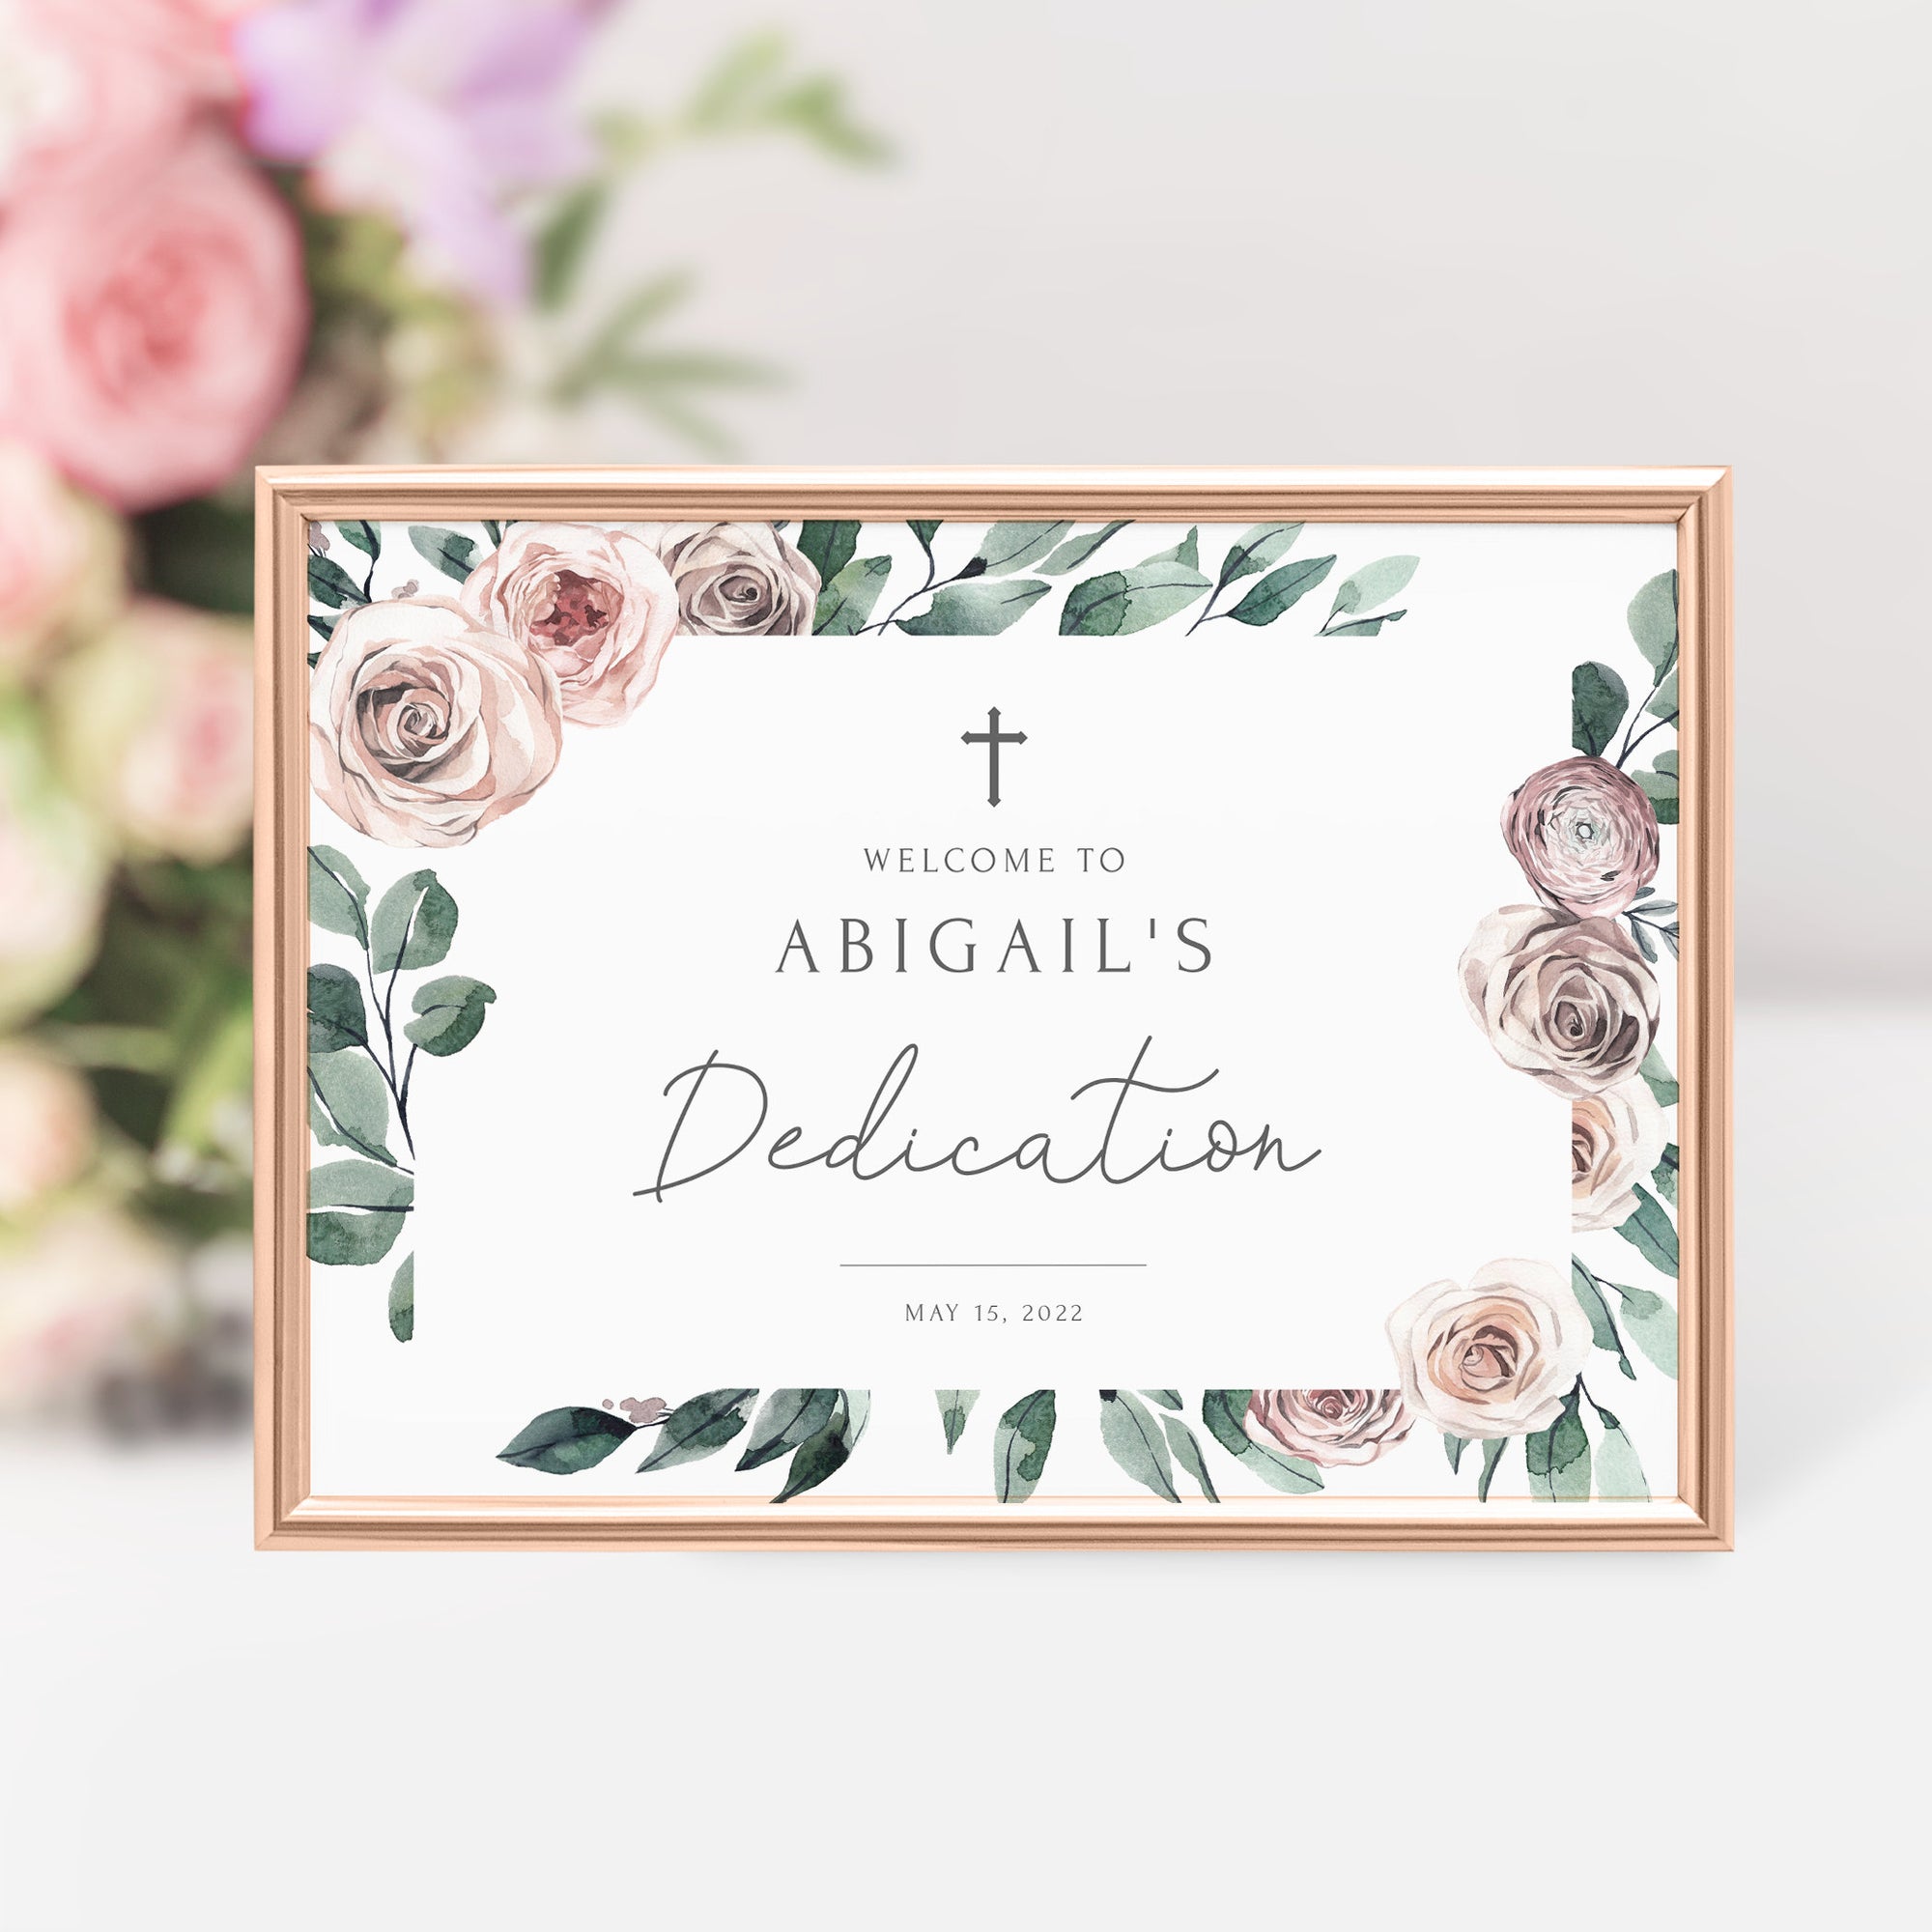 Baby Dedication Welcome Sign Template, Large Welcome Sign Printable, Girl Dedication Decorations, Boho Rose Floral, INSTANT DOWNLOAD BR100